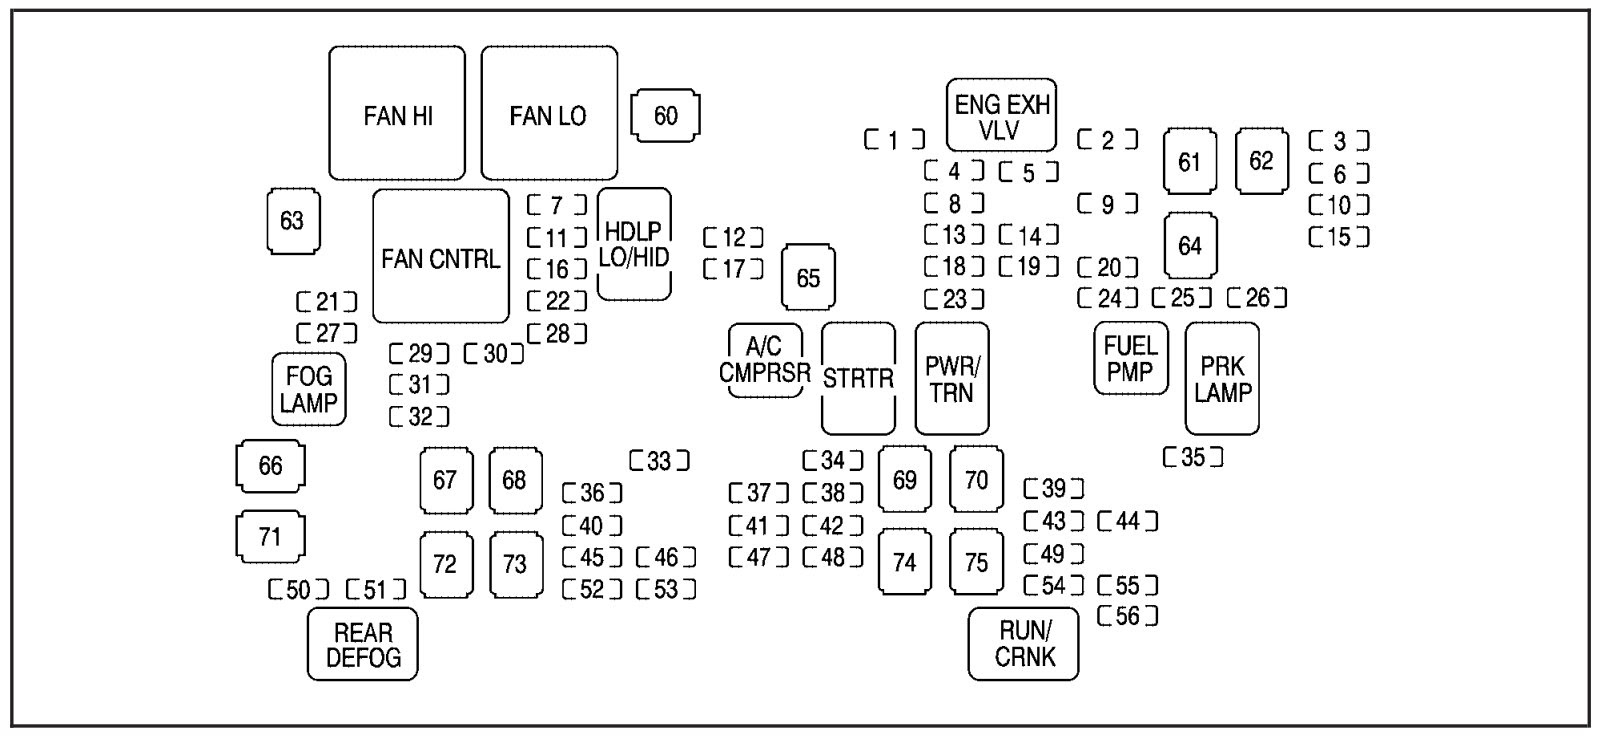 Fuse Box For 2002 Chevrolet Tahoe - Wiring Diagram